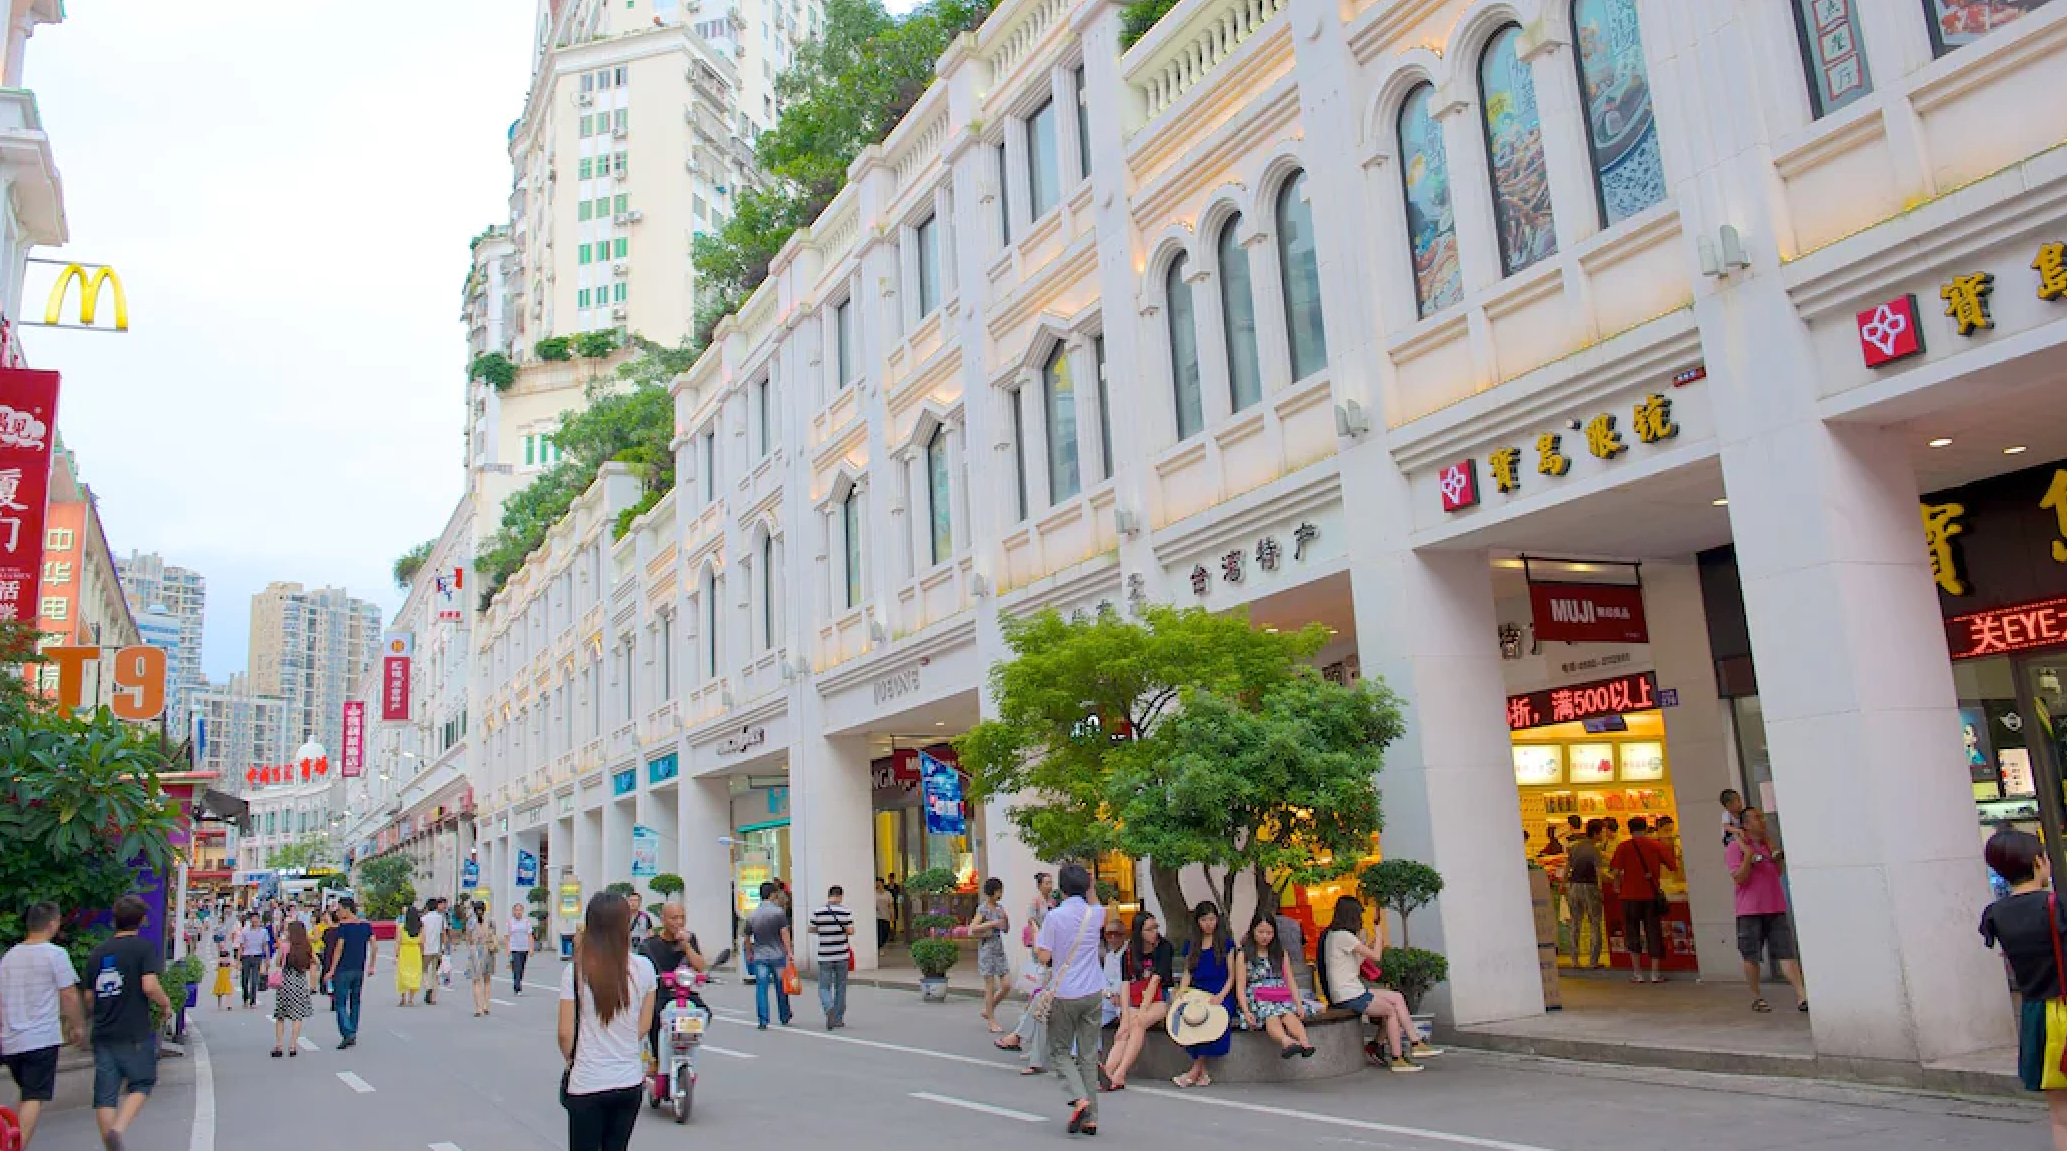 Known for luxury tourism and a laid-back lifestyle, Xiamen is also home to China’s top young designers and the southeastern rich. Welcome to the mainland’s new fashion capital. Photo: Expedia